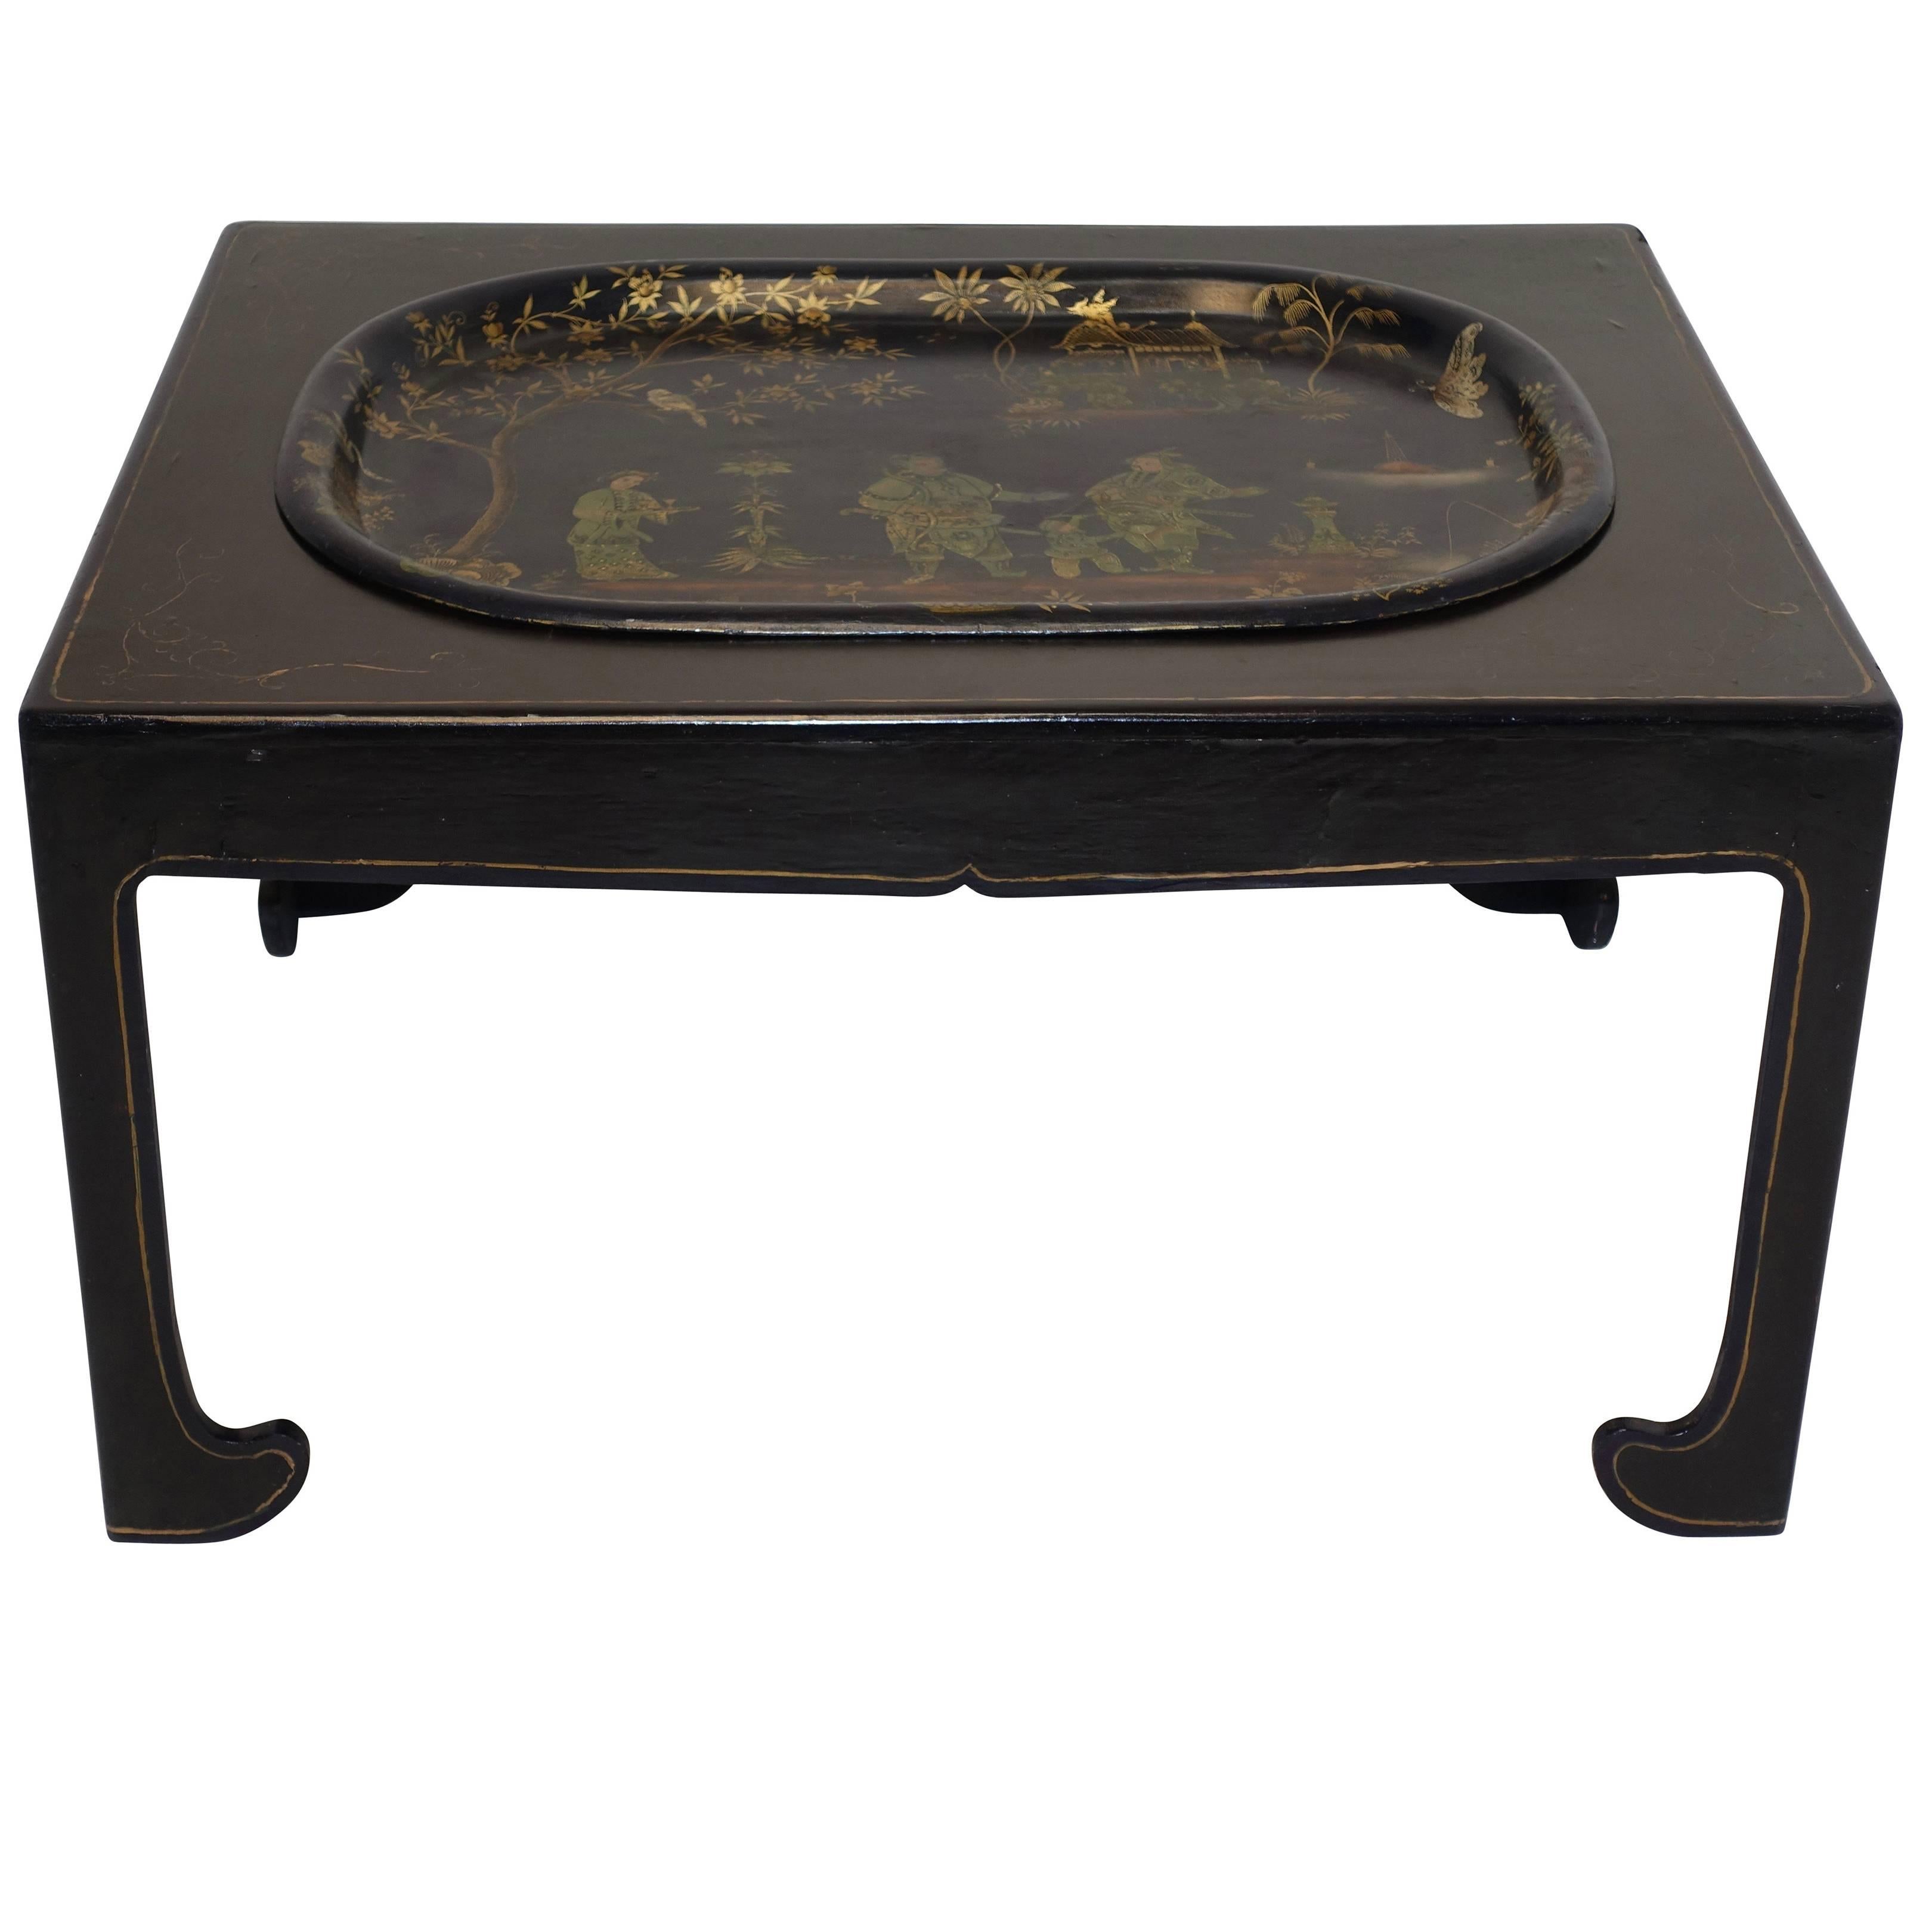 Navy Blue Tole Tray Table with Black Asian Style Stand, England, 19th Century